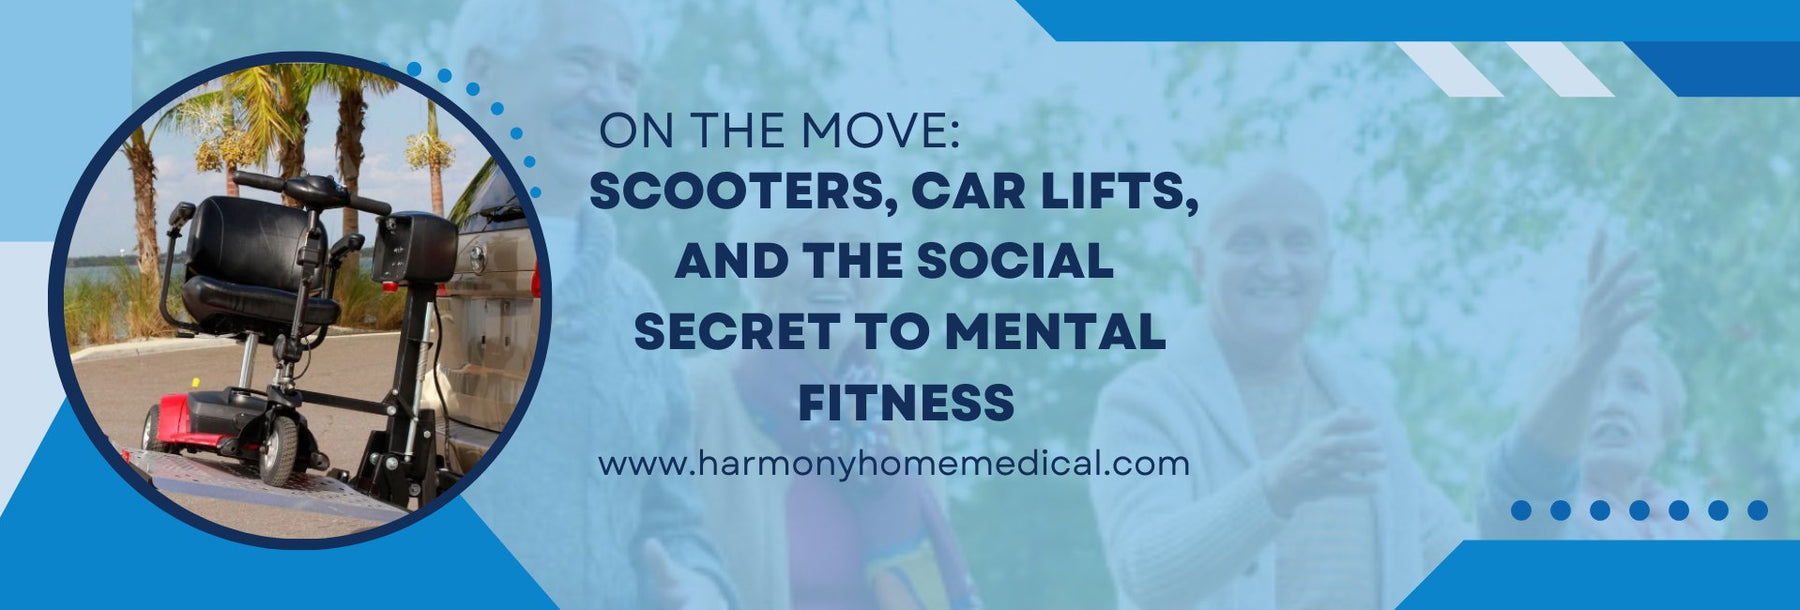 On the Move: Scooters, Car Lifts, and the Social Secret to Mental Fitness - Harmony Home Medical Supply